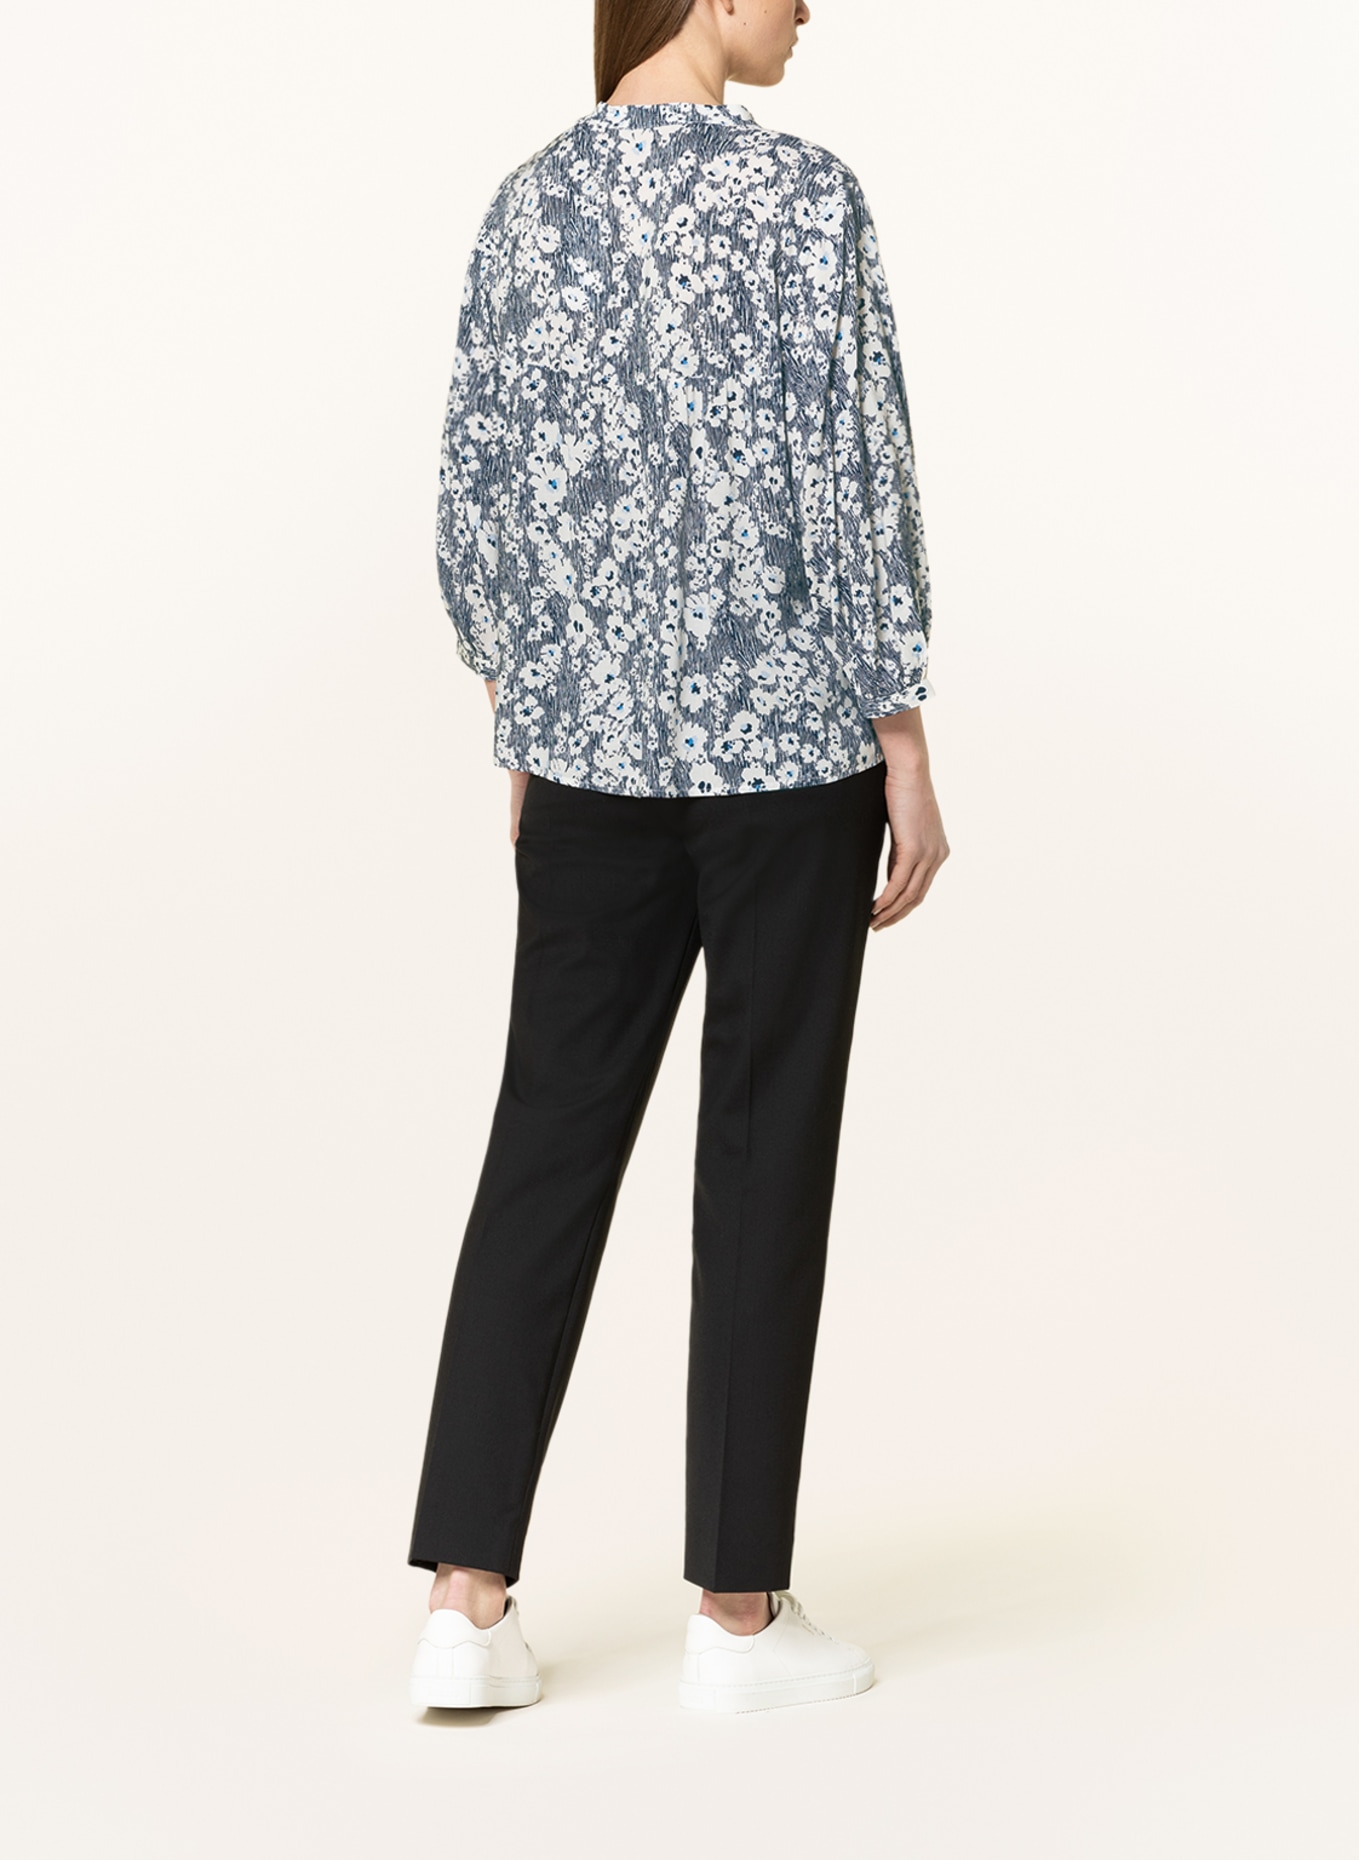 OPUS Shirt blouse FALINDO with 3/4 sleeves, Color: DARK BLUE/ WHITE (Image 3)